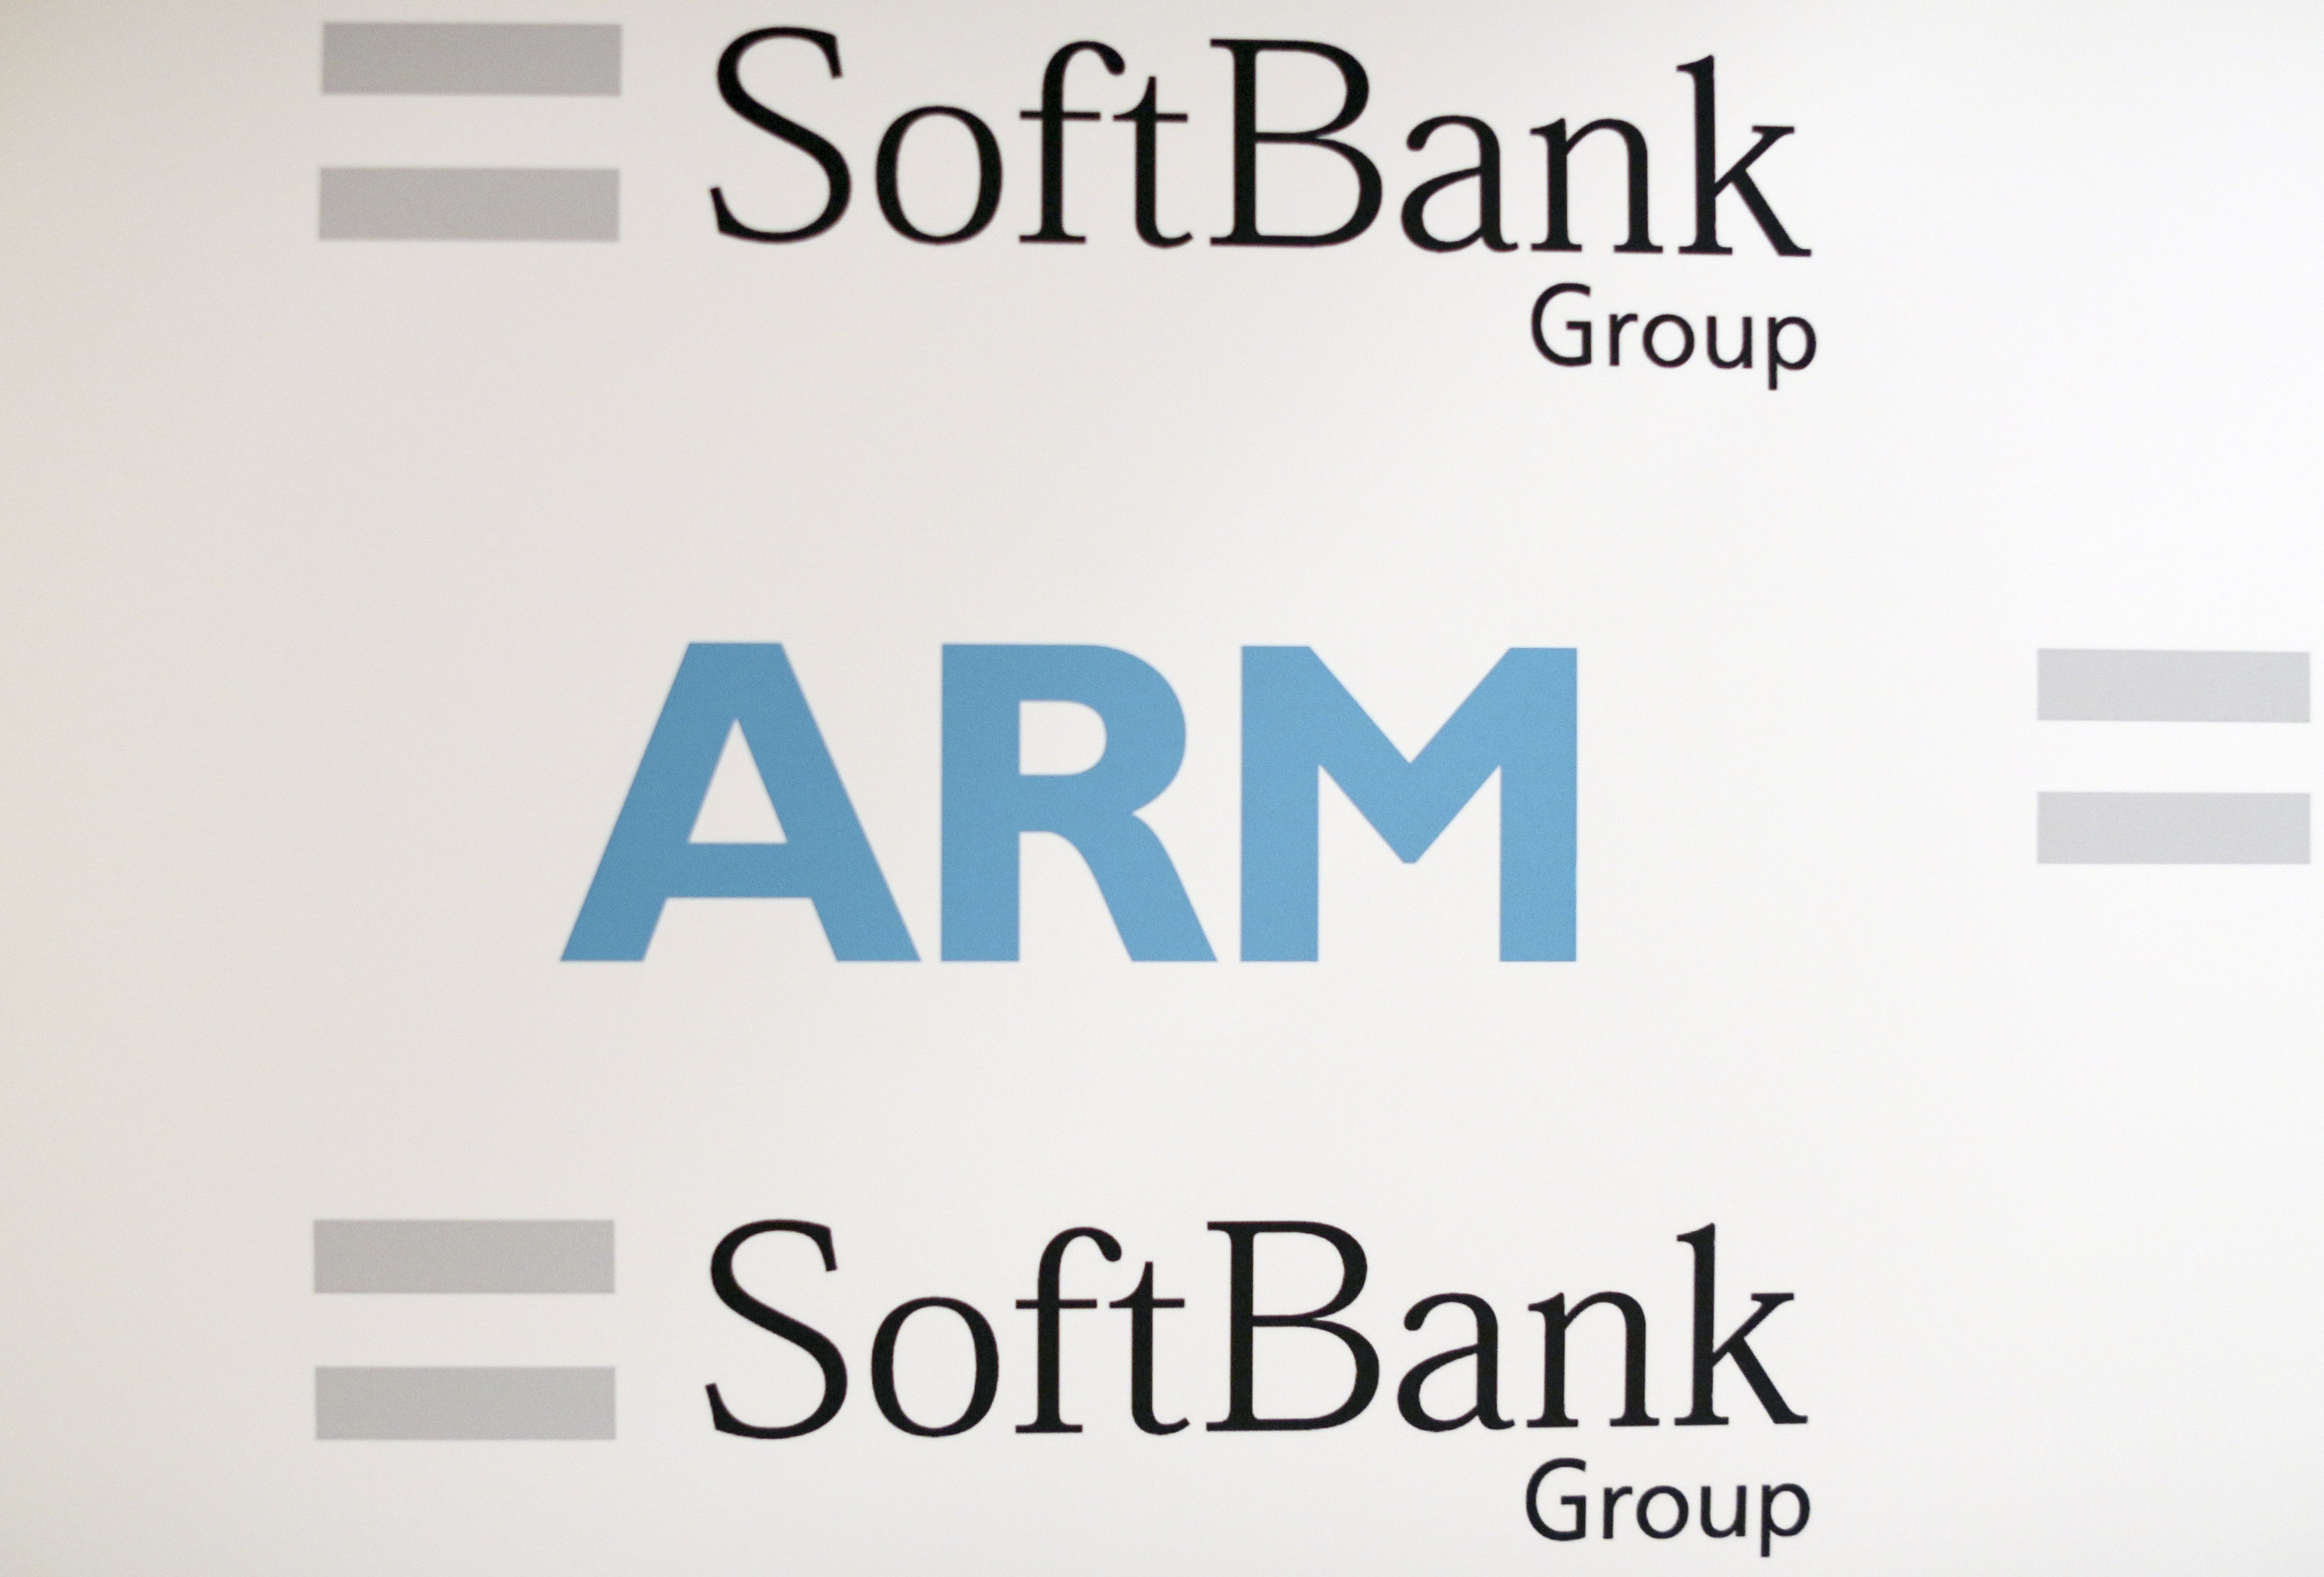 An ARM and SoftBank Group branded board is displayed at a news conference in London